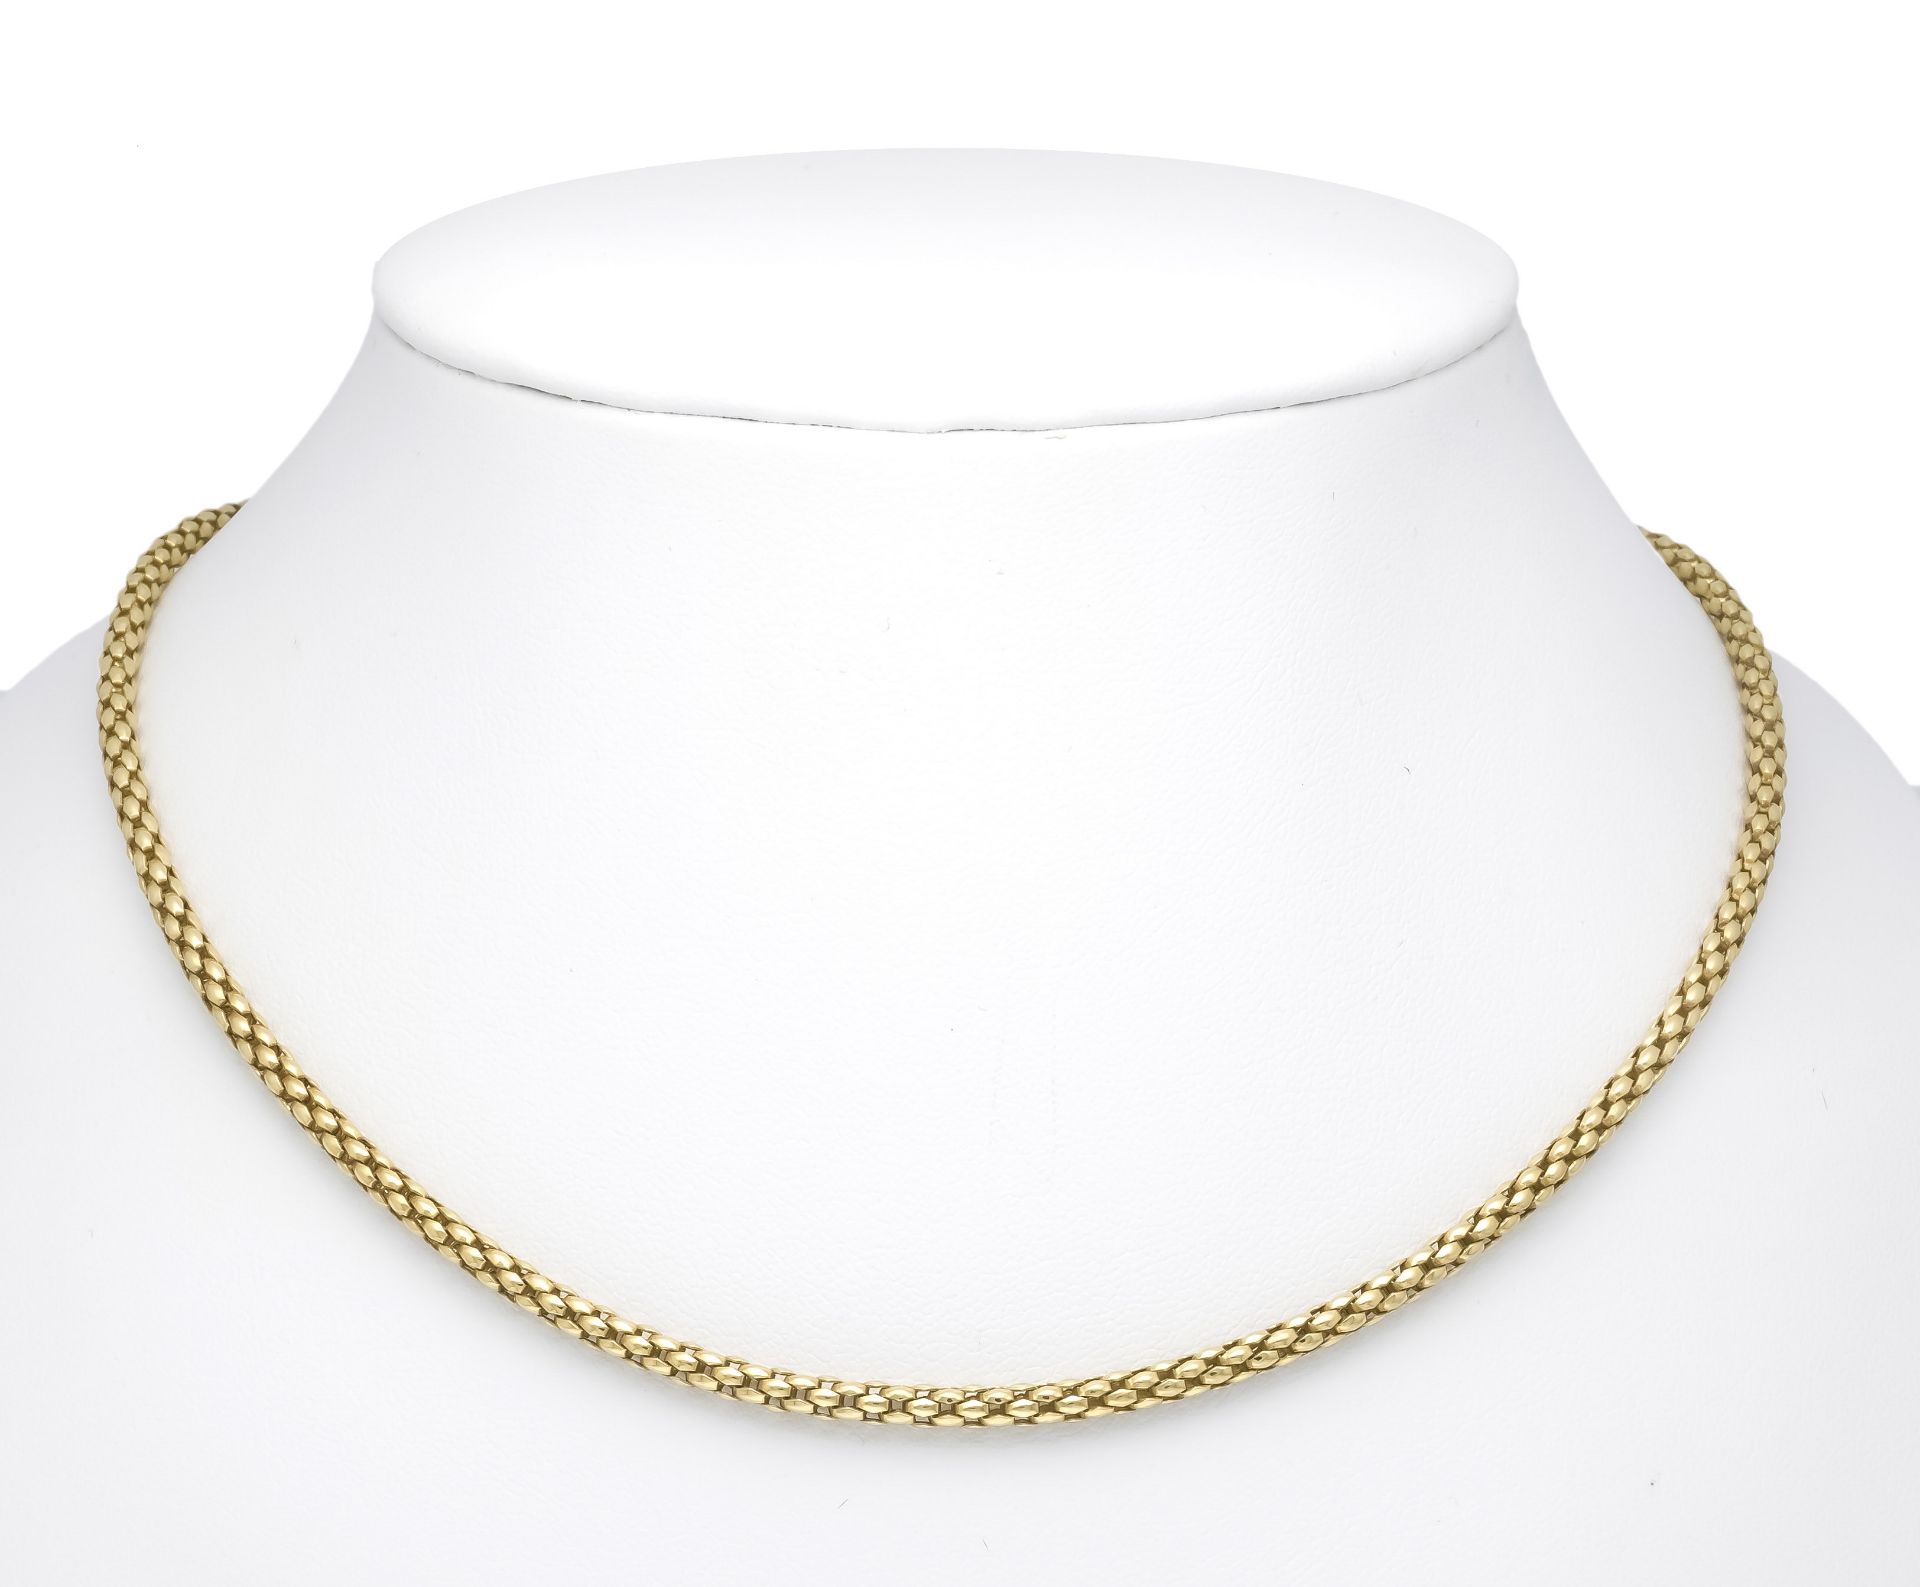 FOPE necklace GG 750/000 snake chain with lobster clasp, l. 45 cm, 17.1 g